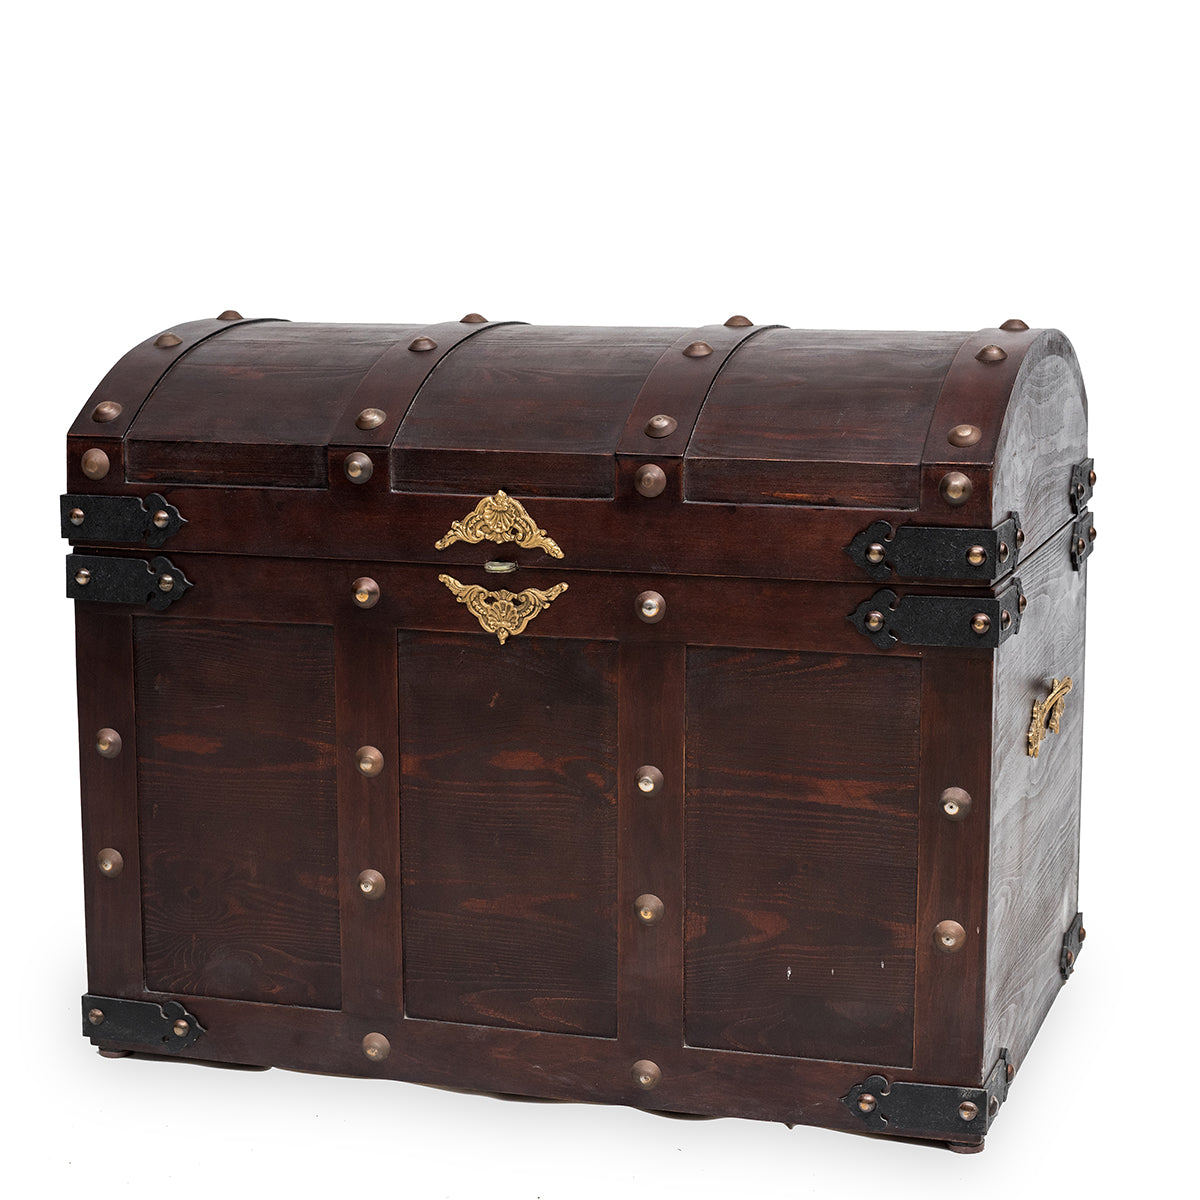 Treasure Chests - 3 sizes (3 Pack)